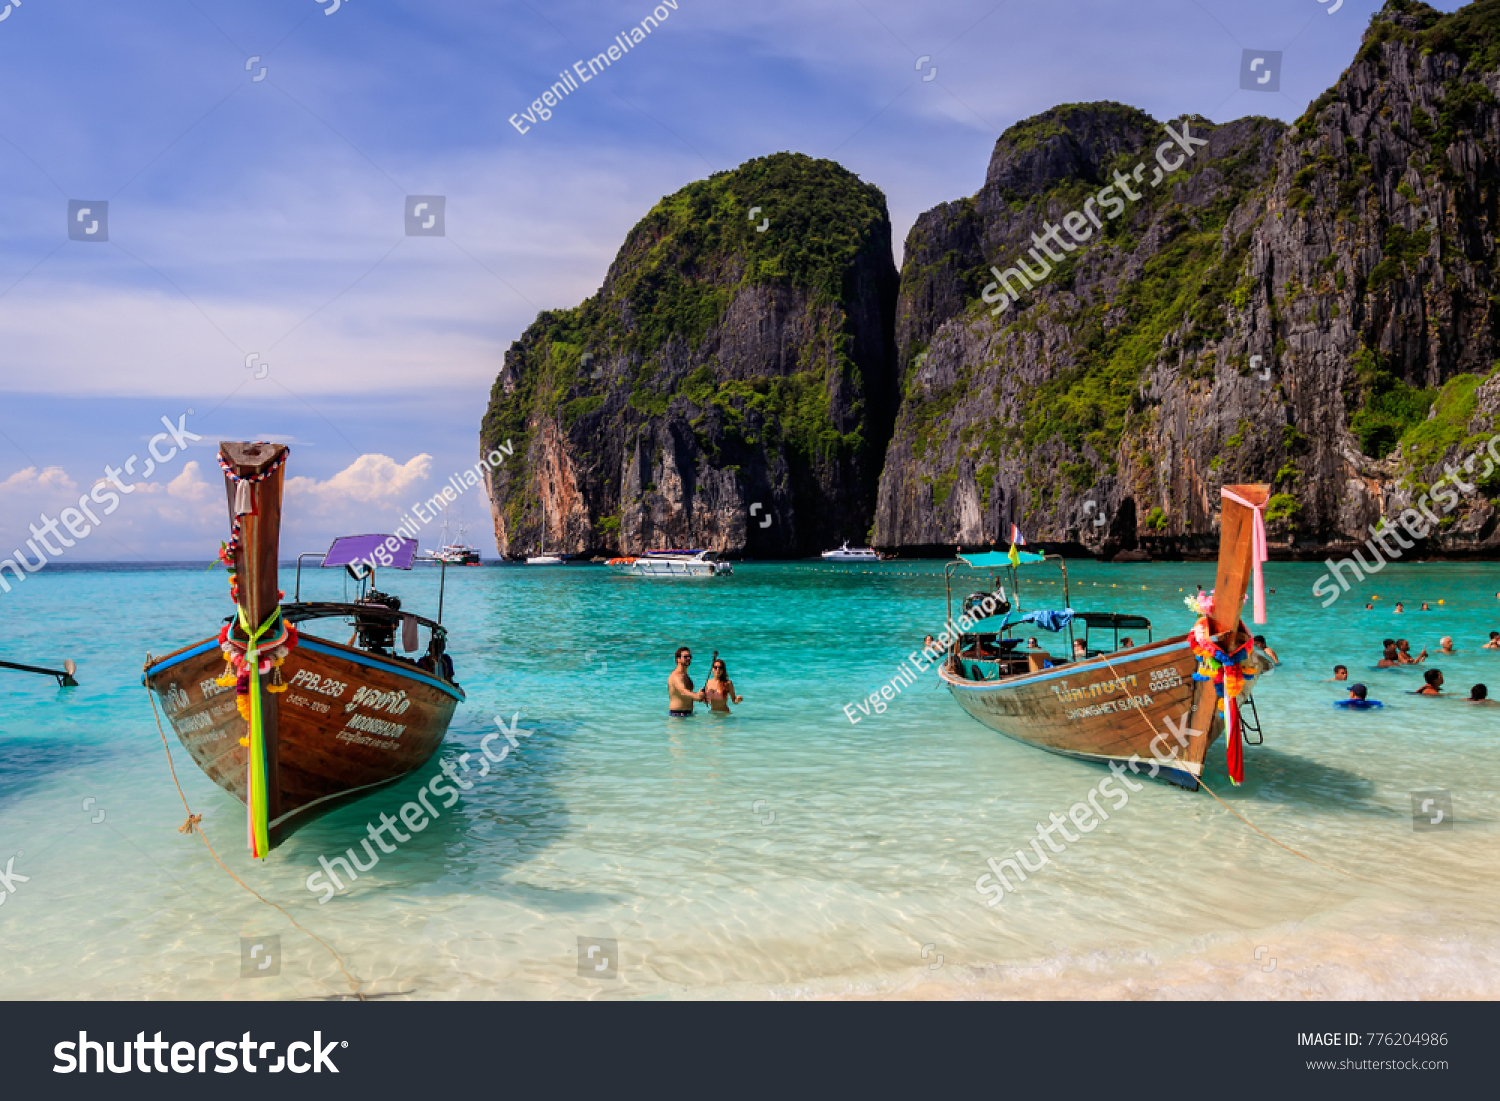 Maya Bay, Thailand, Krabi  - November 20, 2017: island of Phi Phi in a summer sunny day with karst rocks, boats, people and turquoise sea. Landscape.  #776204986